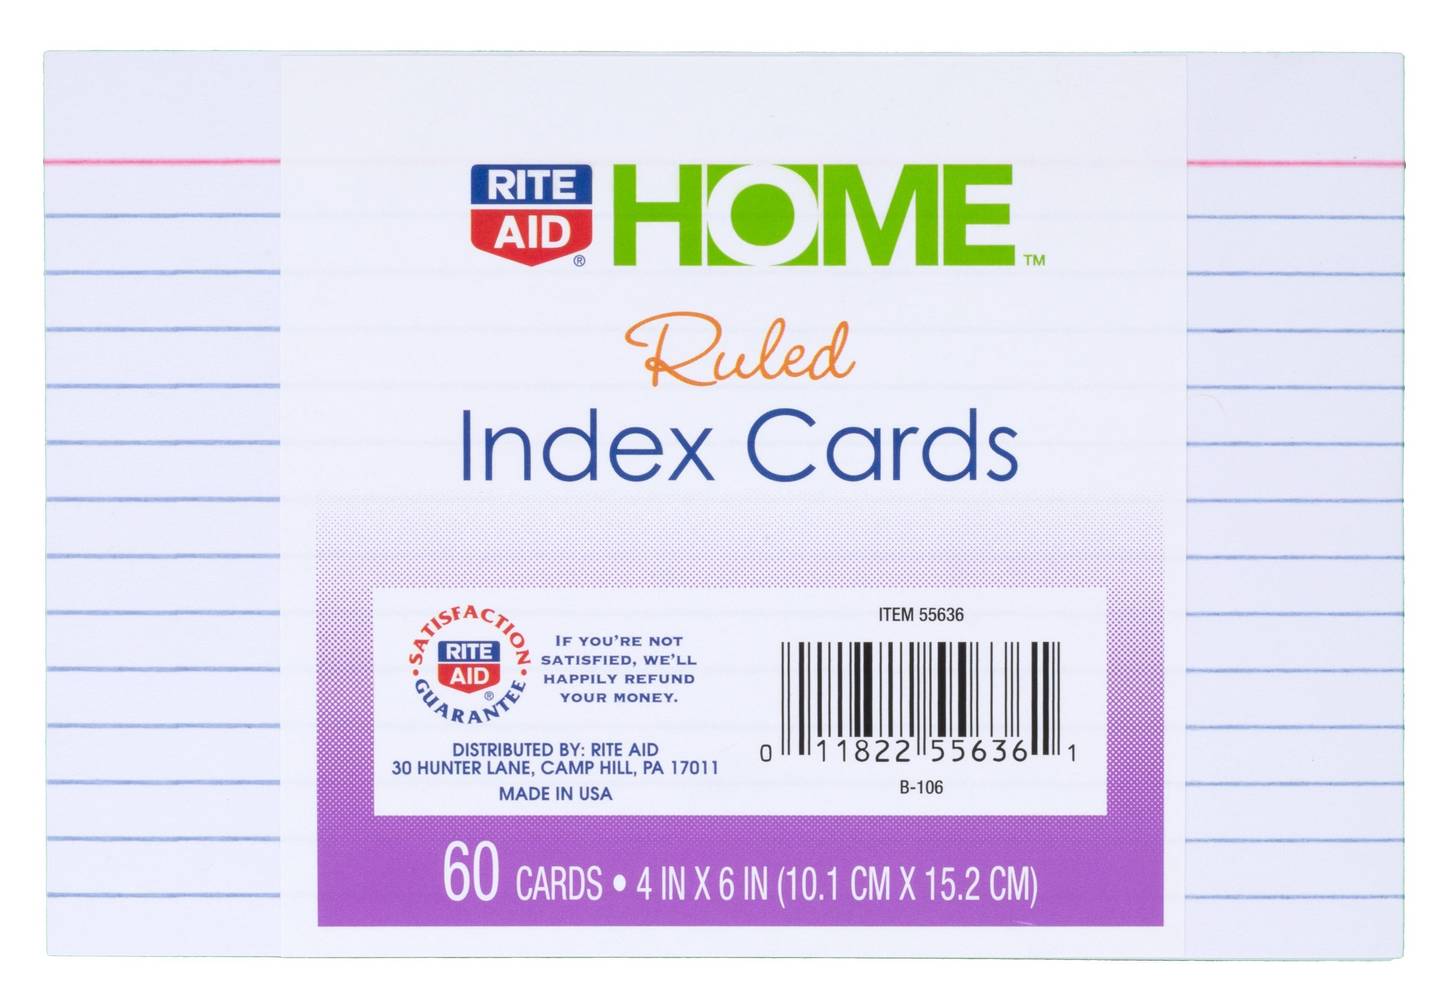 Rite Aid Home Ruled Index Cards